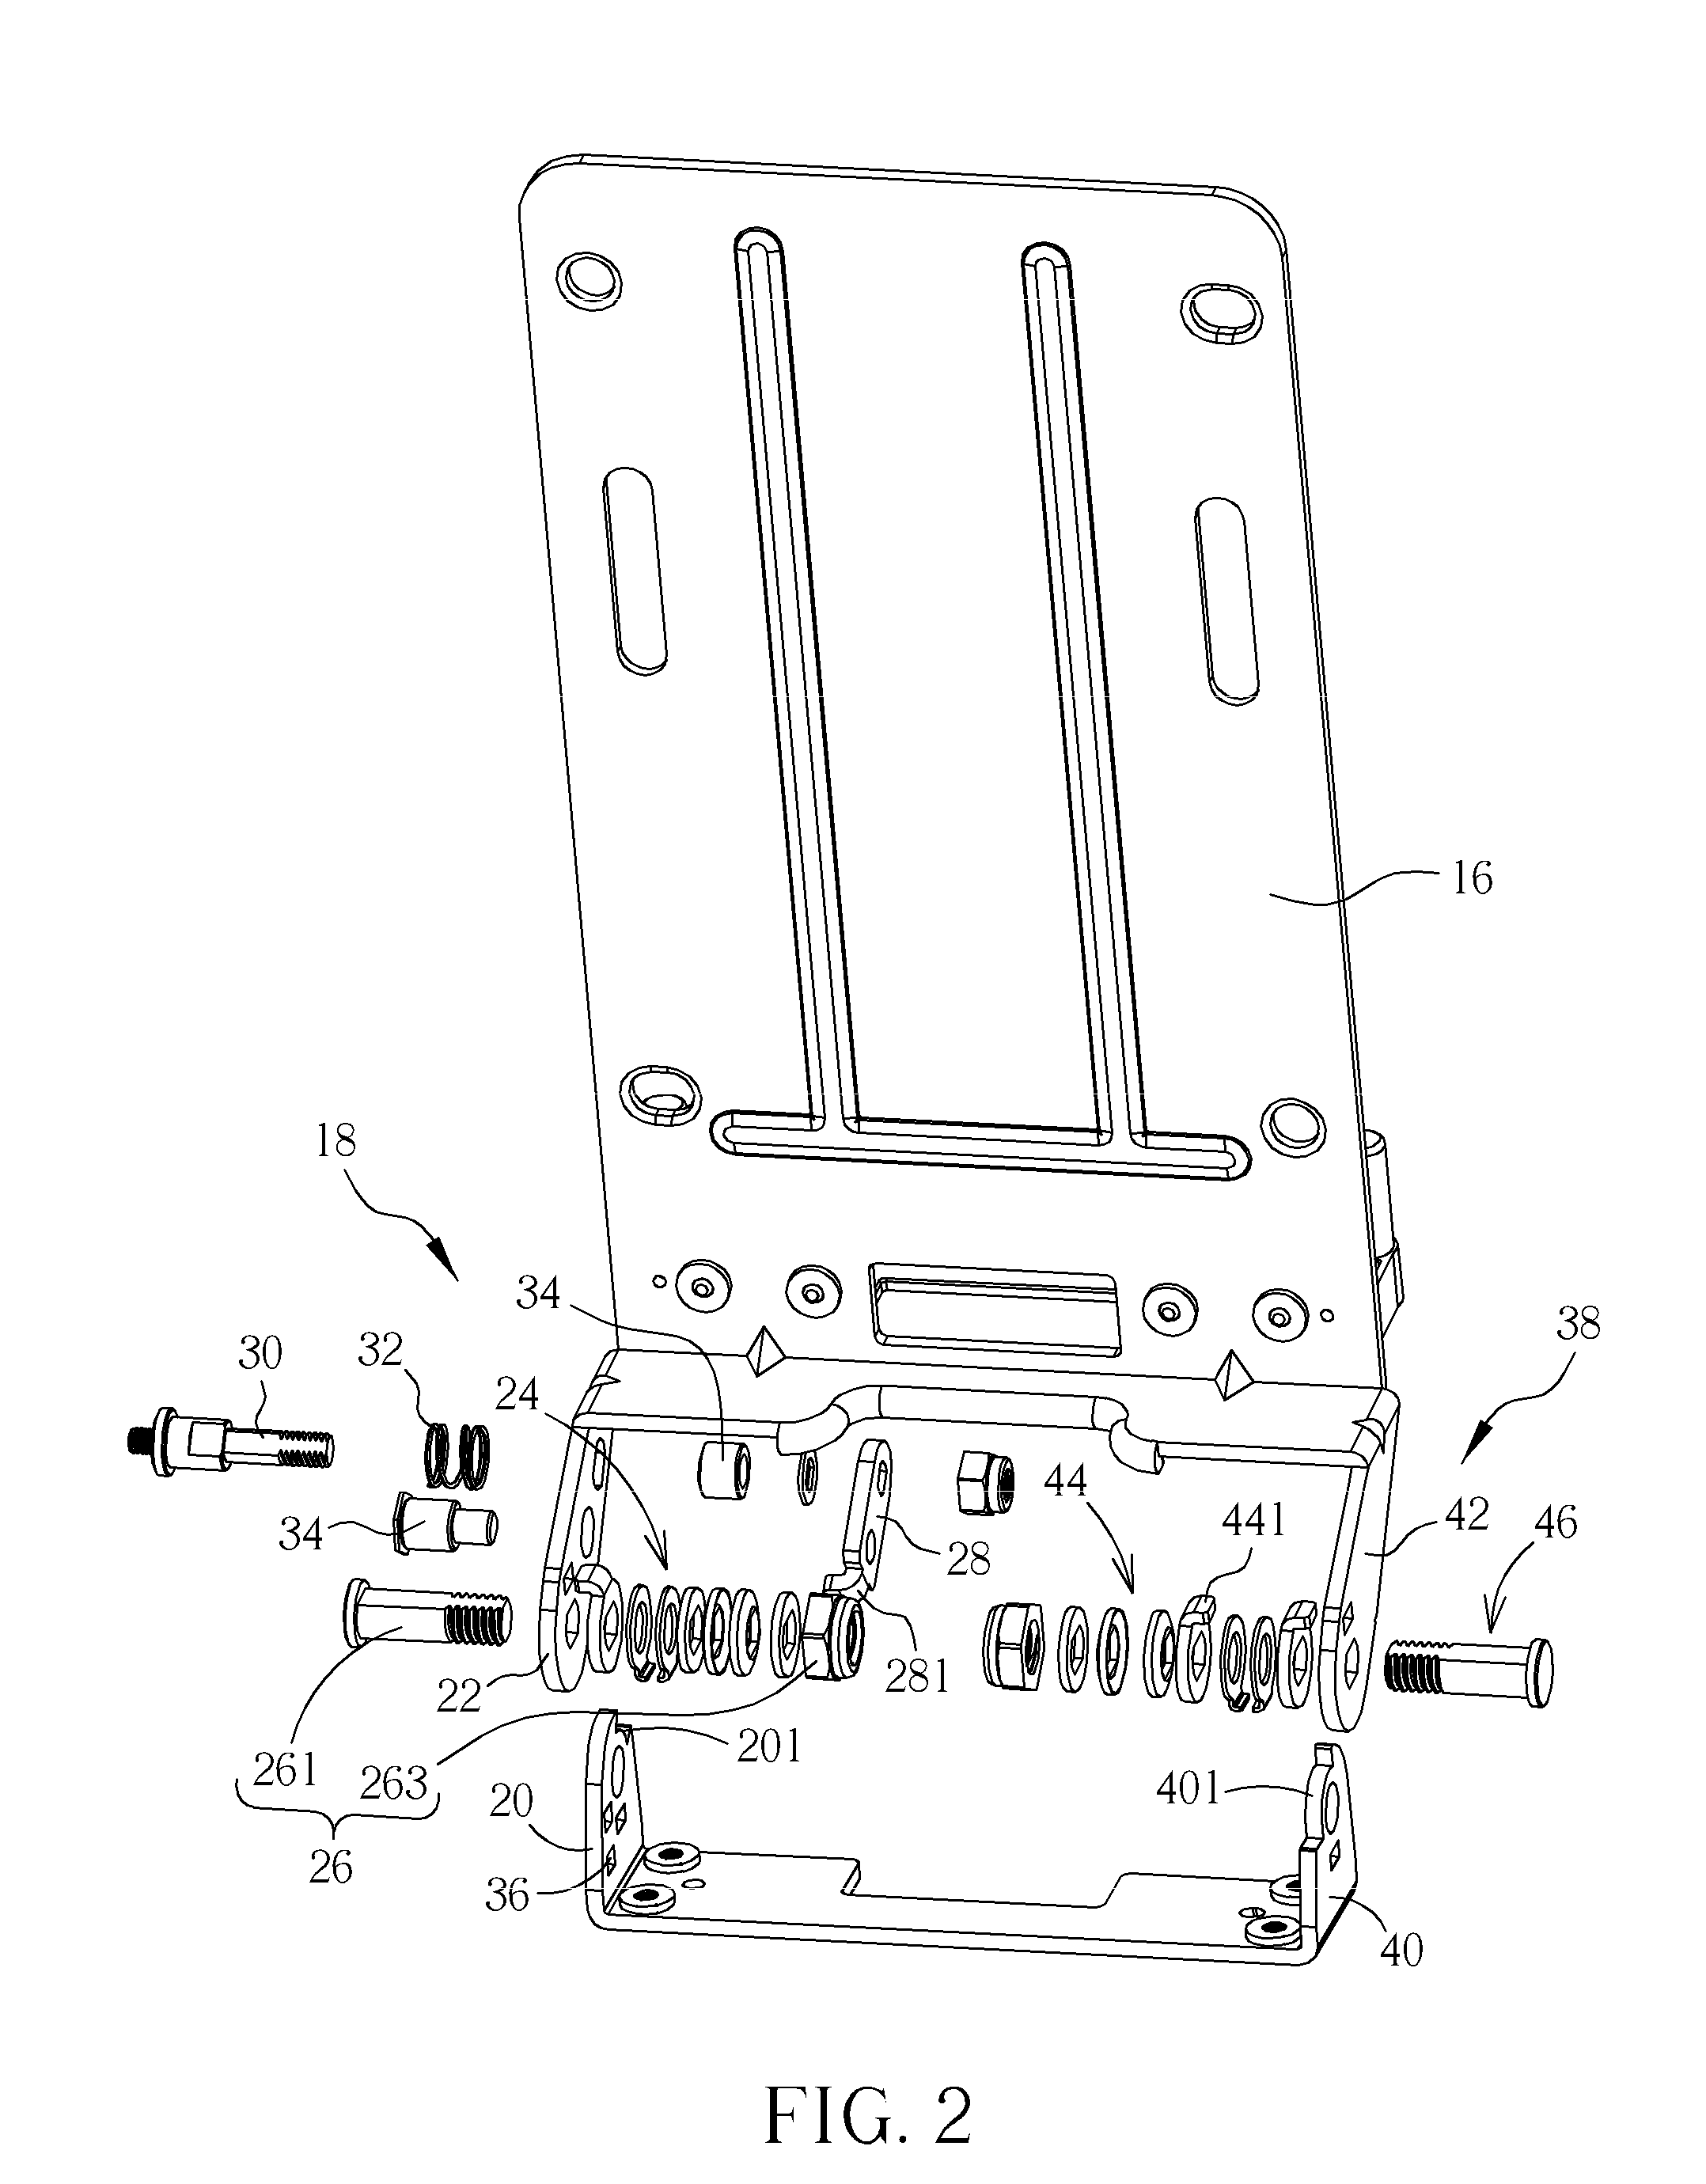 Panel positioning mechanism and display device with different positioning modes